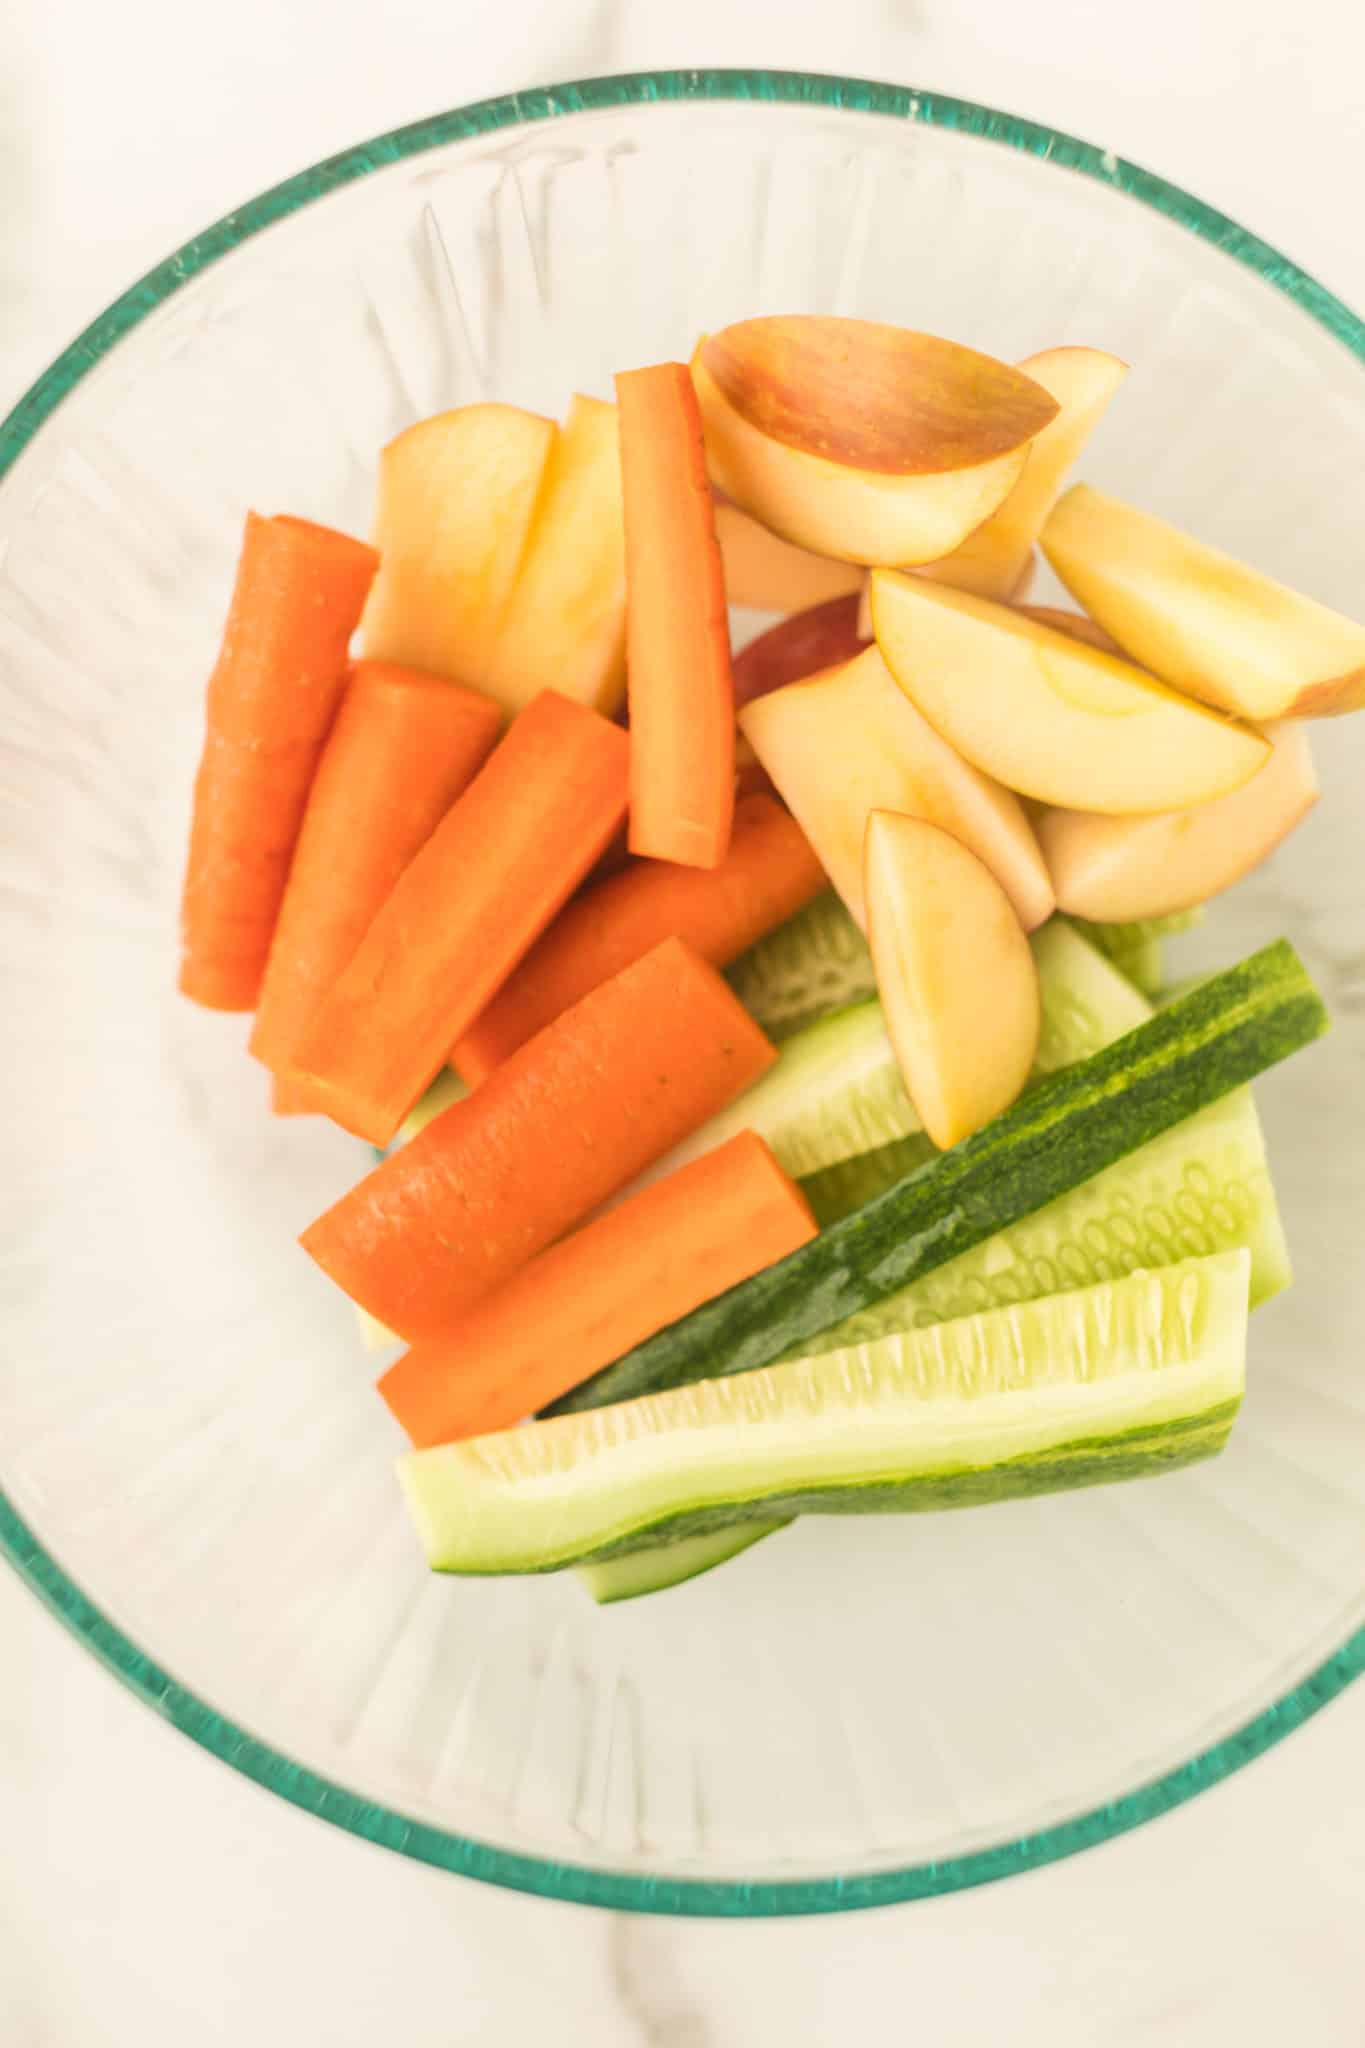 cut up apples, carrots, and cucumber